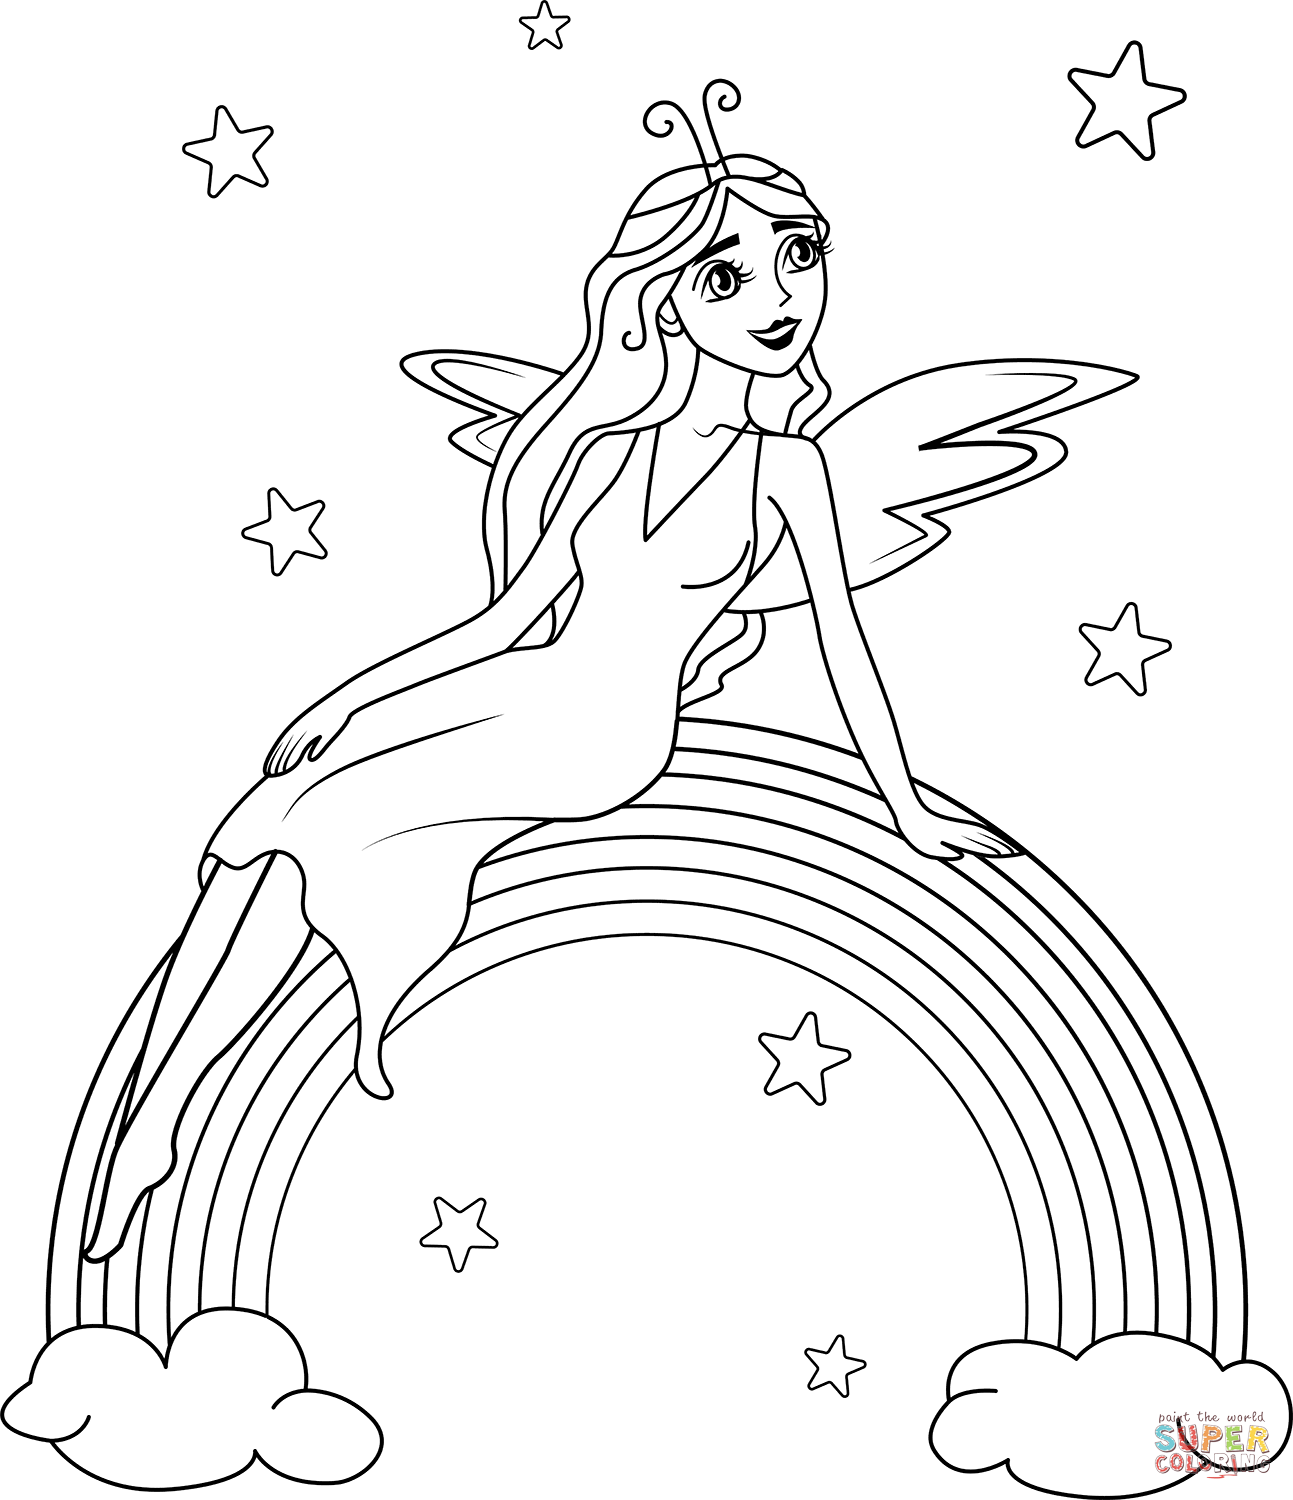 Rainbow fairy coloring page free printable coloring pages